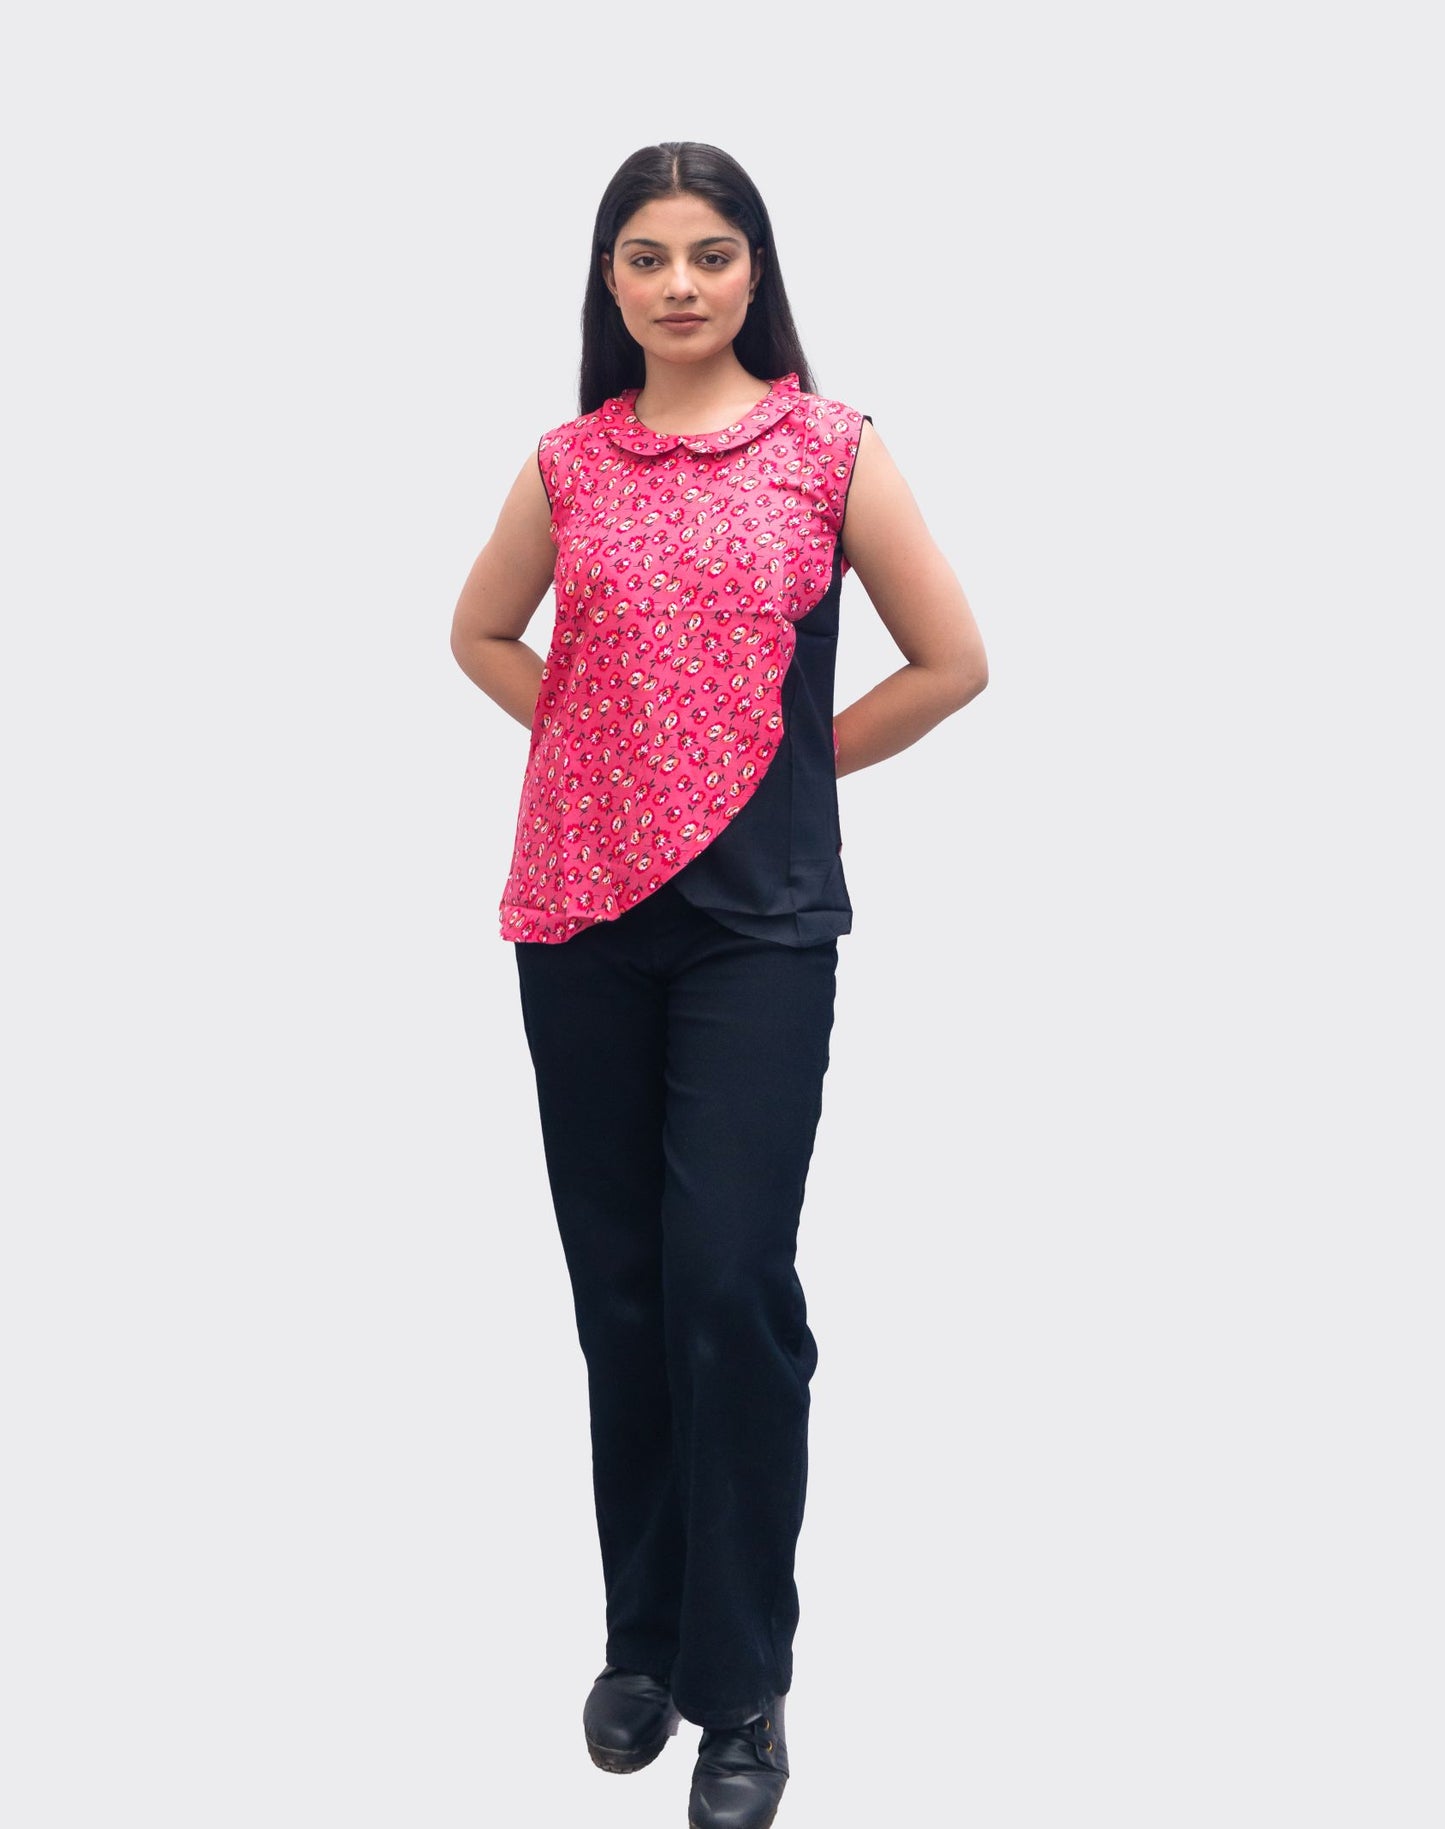 Blushing in Pink: A Chic Rayon Top by Anikrriti"